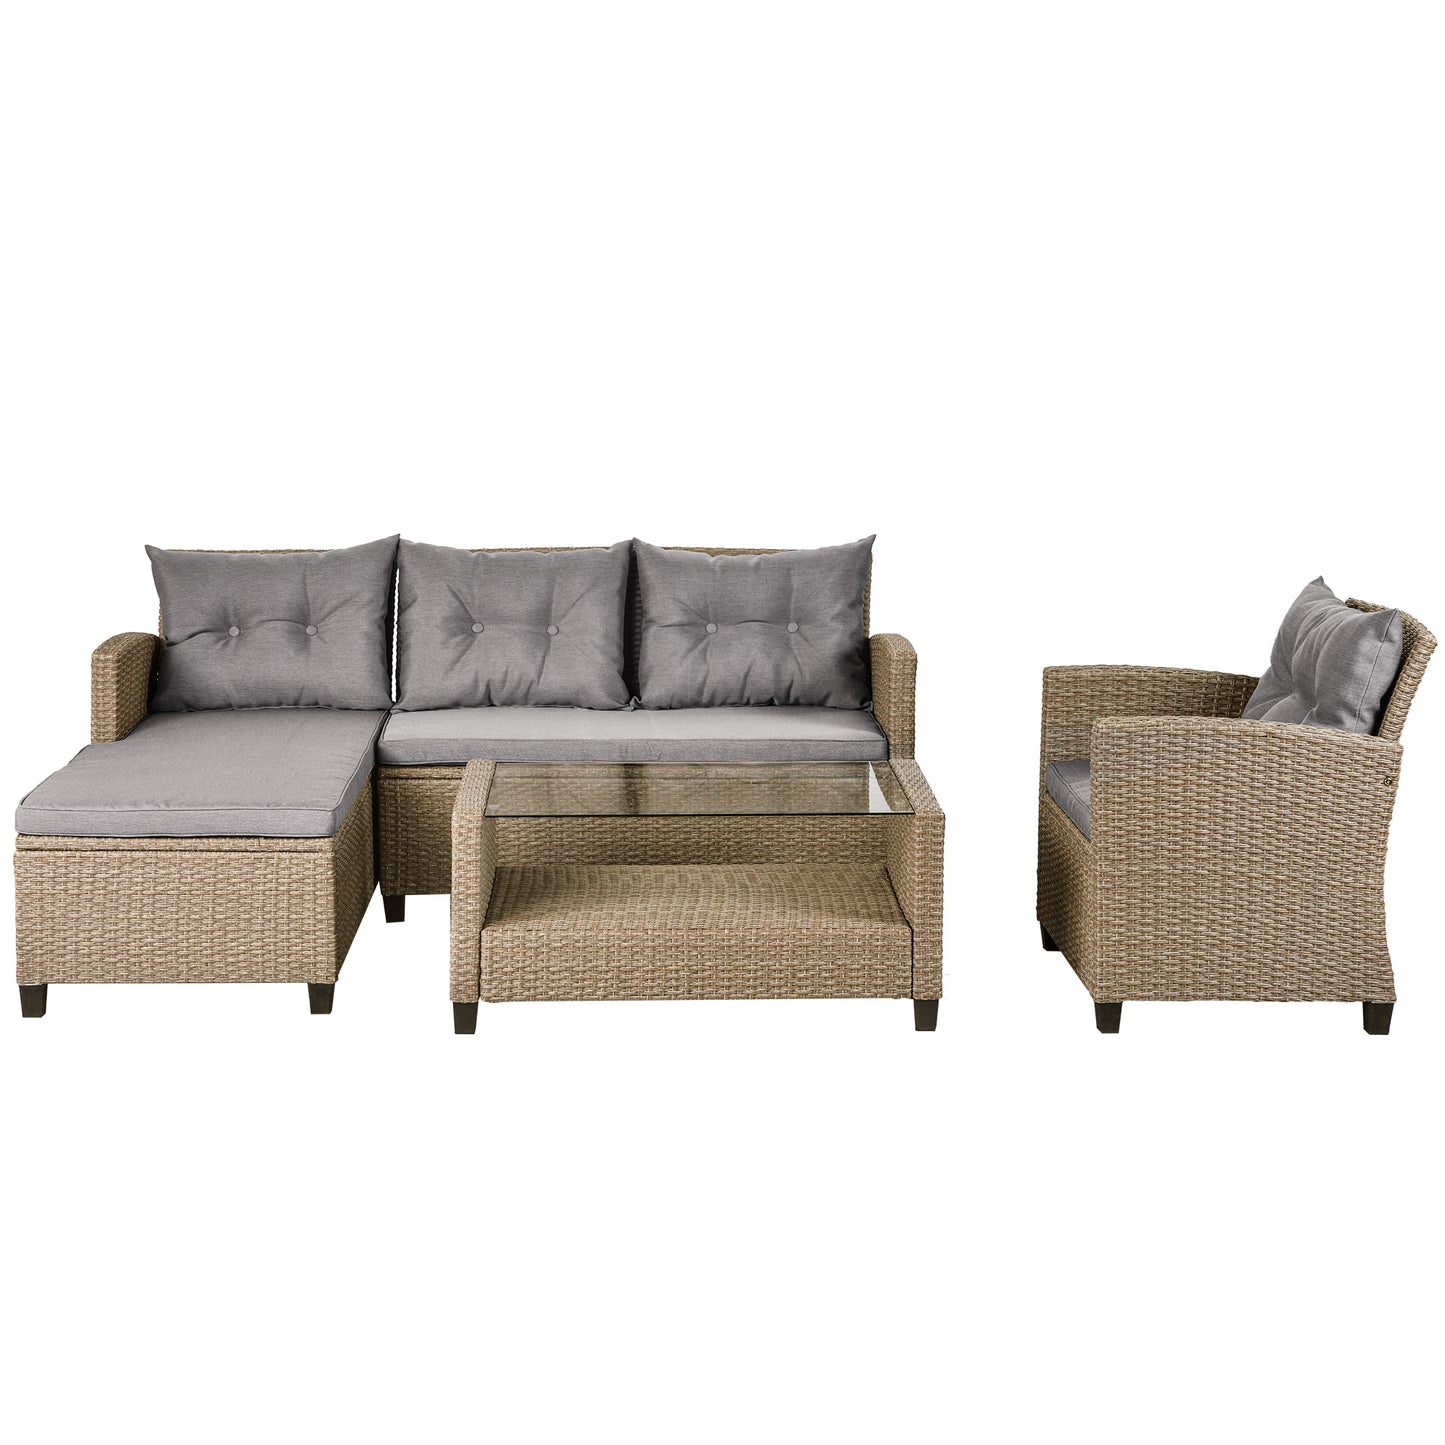 U_STYLE Outdoor, Patio Furniture Sets, 4 Piece Conversation Set Wicker Ratten Sectional Sofa with Seat Cushions(Beige Brown)